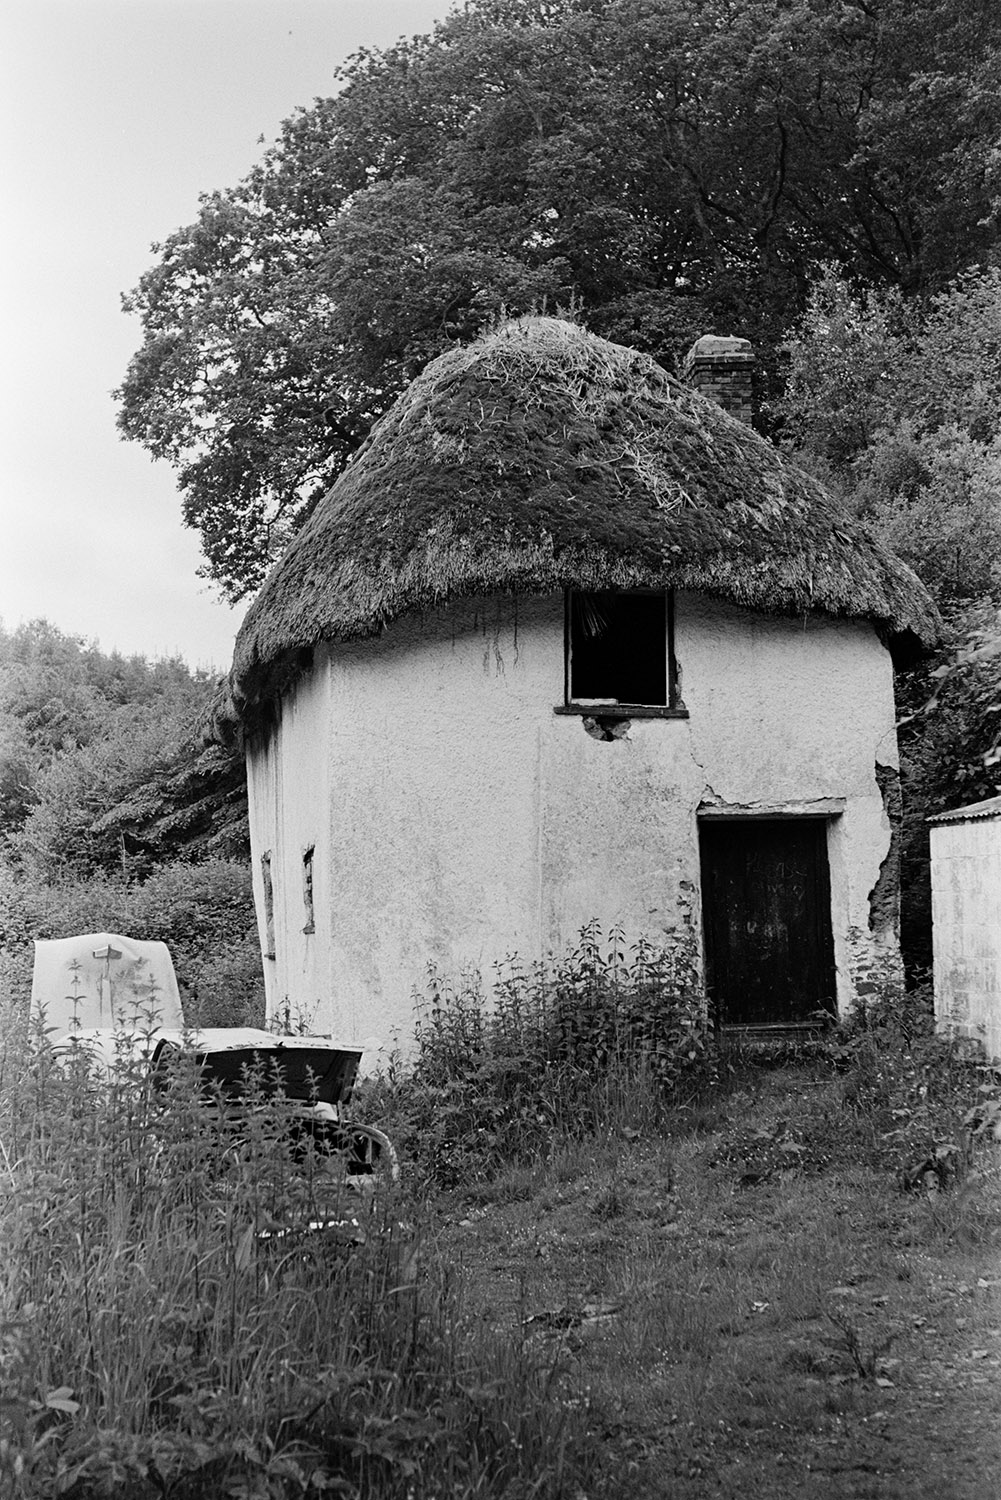 A derelict cob and thatch cottage surrounded by trees near Westleigh. An old car with its boot and bonnet open is parked in front of the cottage.